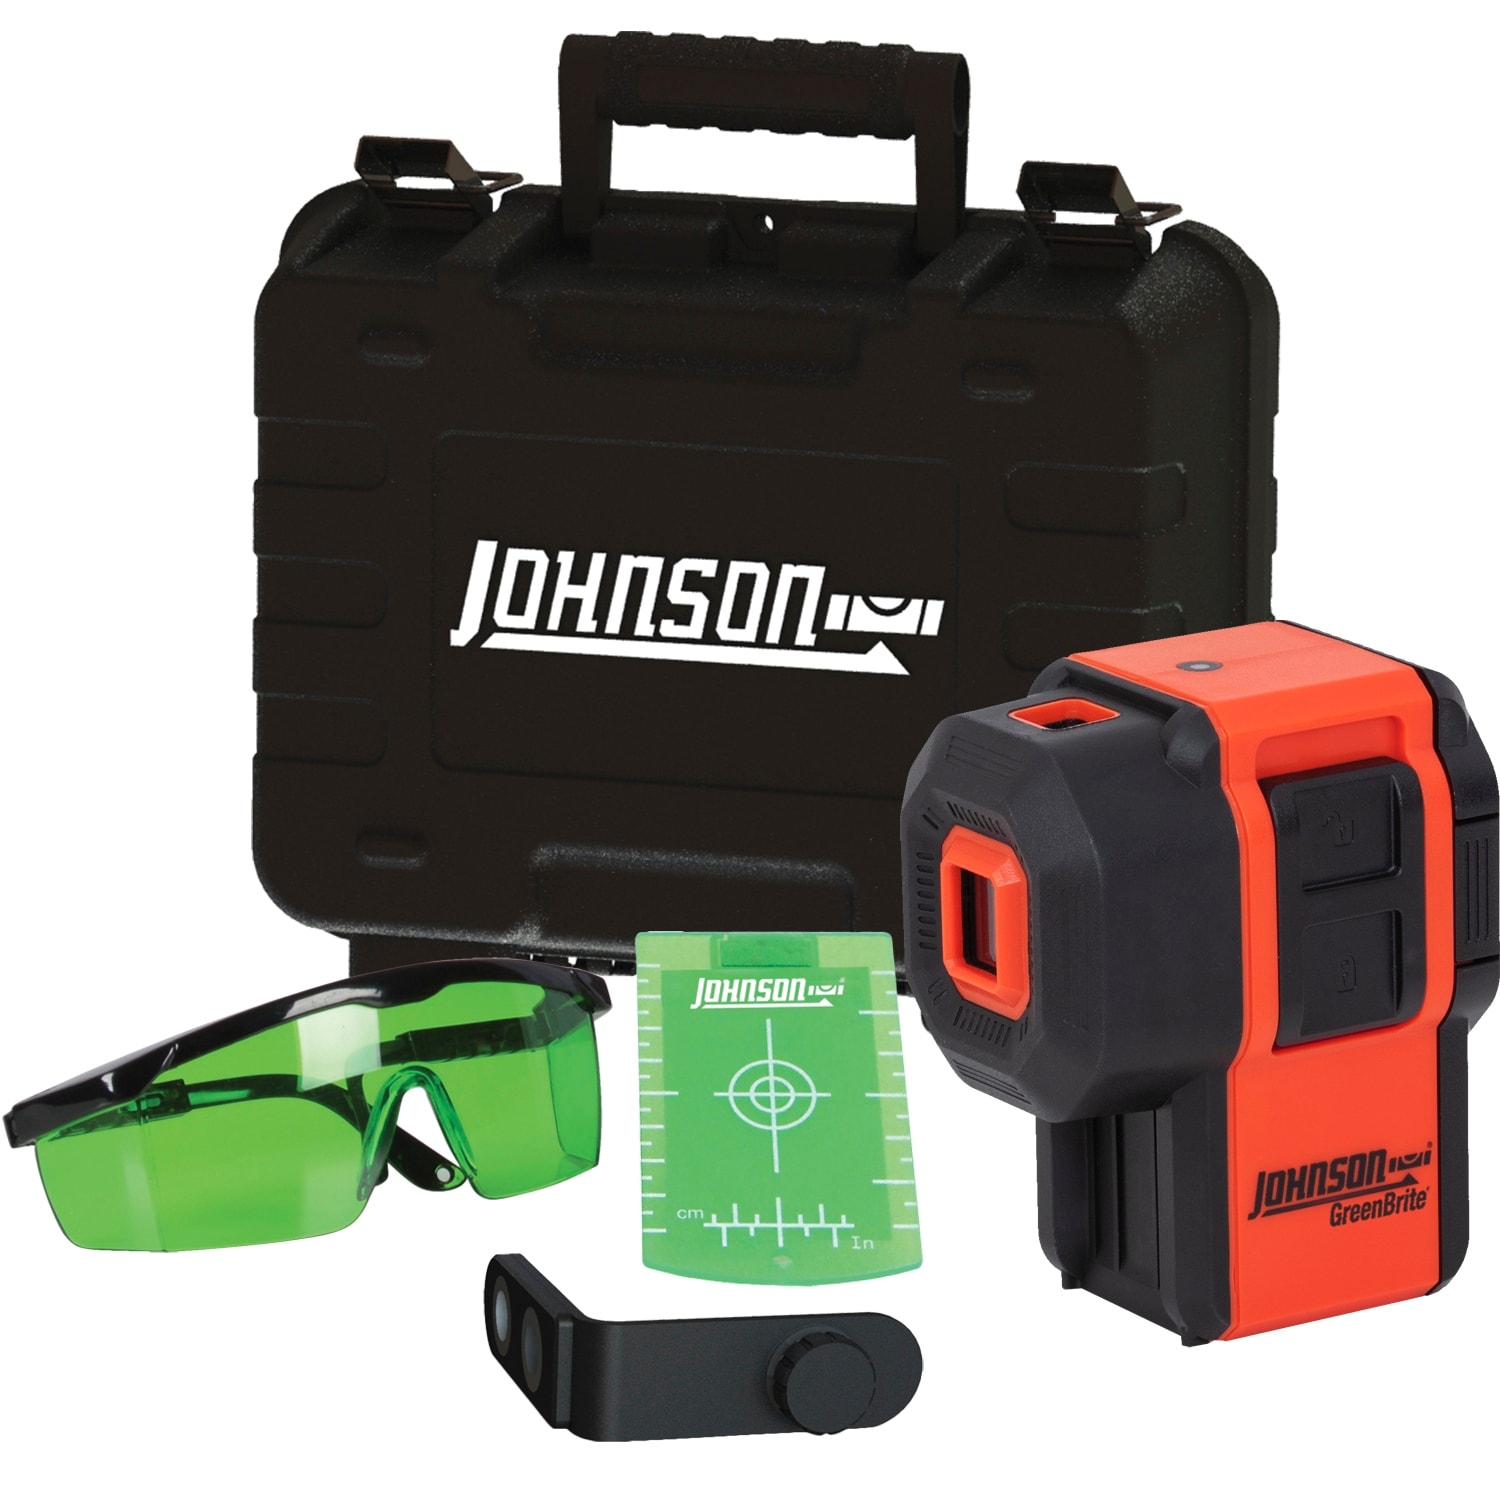 Green 100-ft Self-Leveling Indoor/Outdoor Line Generator Laser Level with 3 Spot Beam | - Johnson Level 40-6641